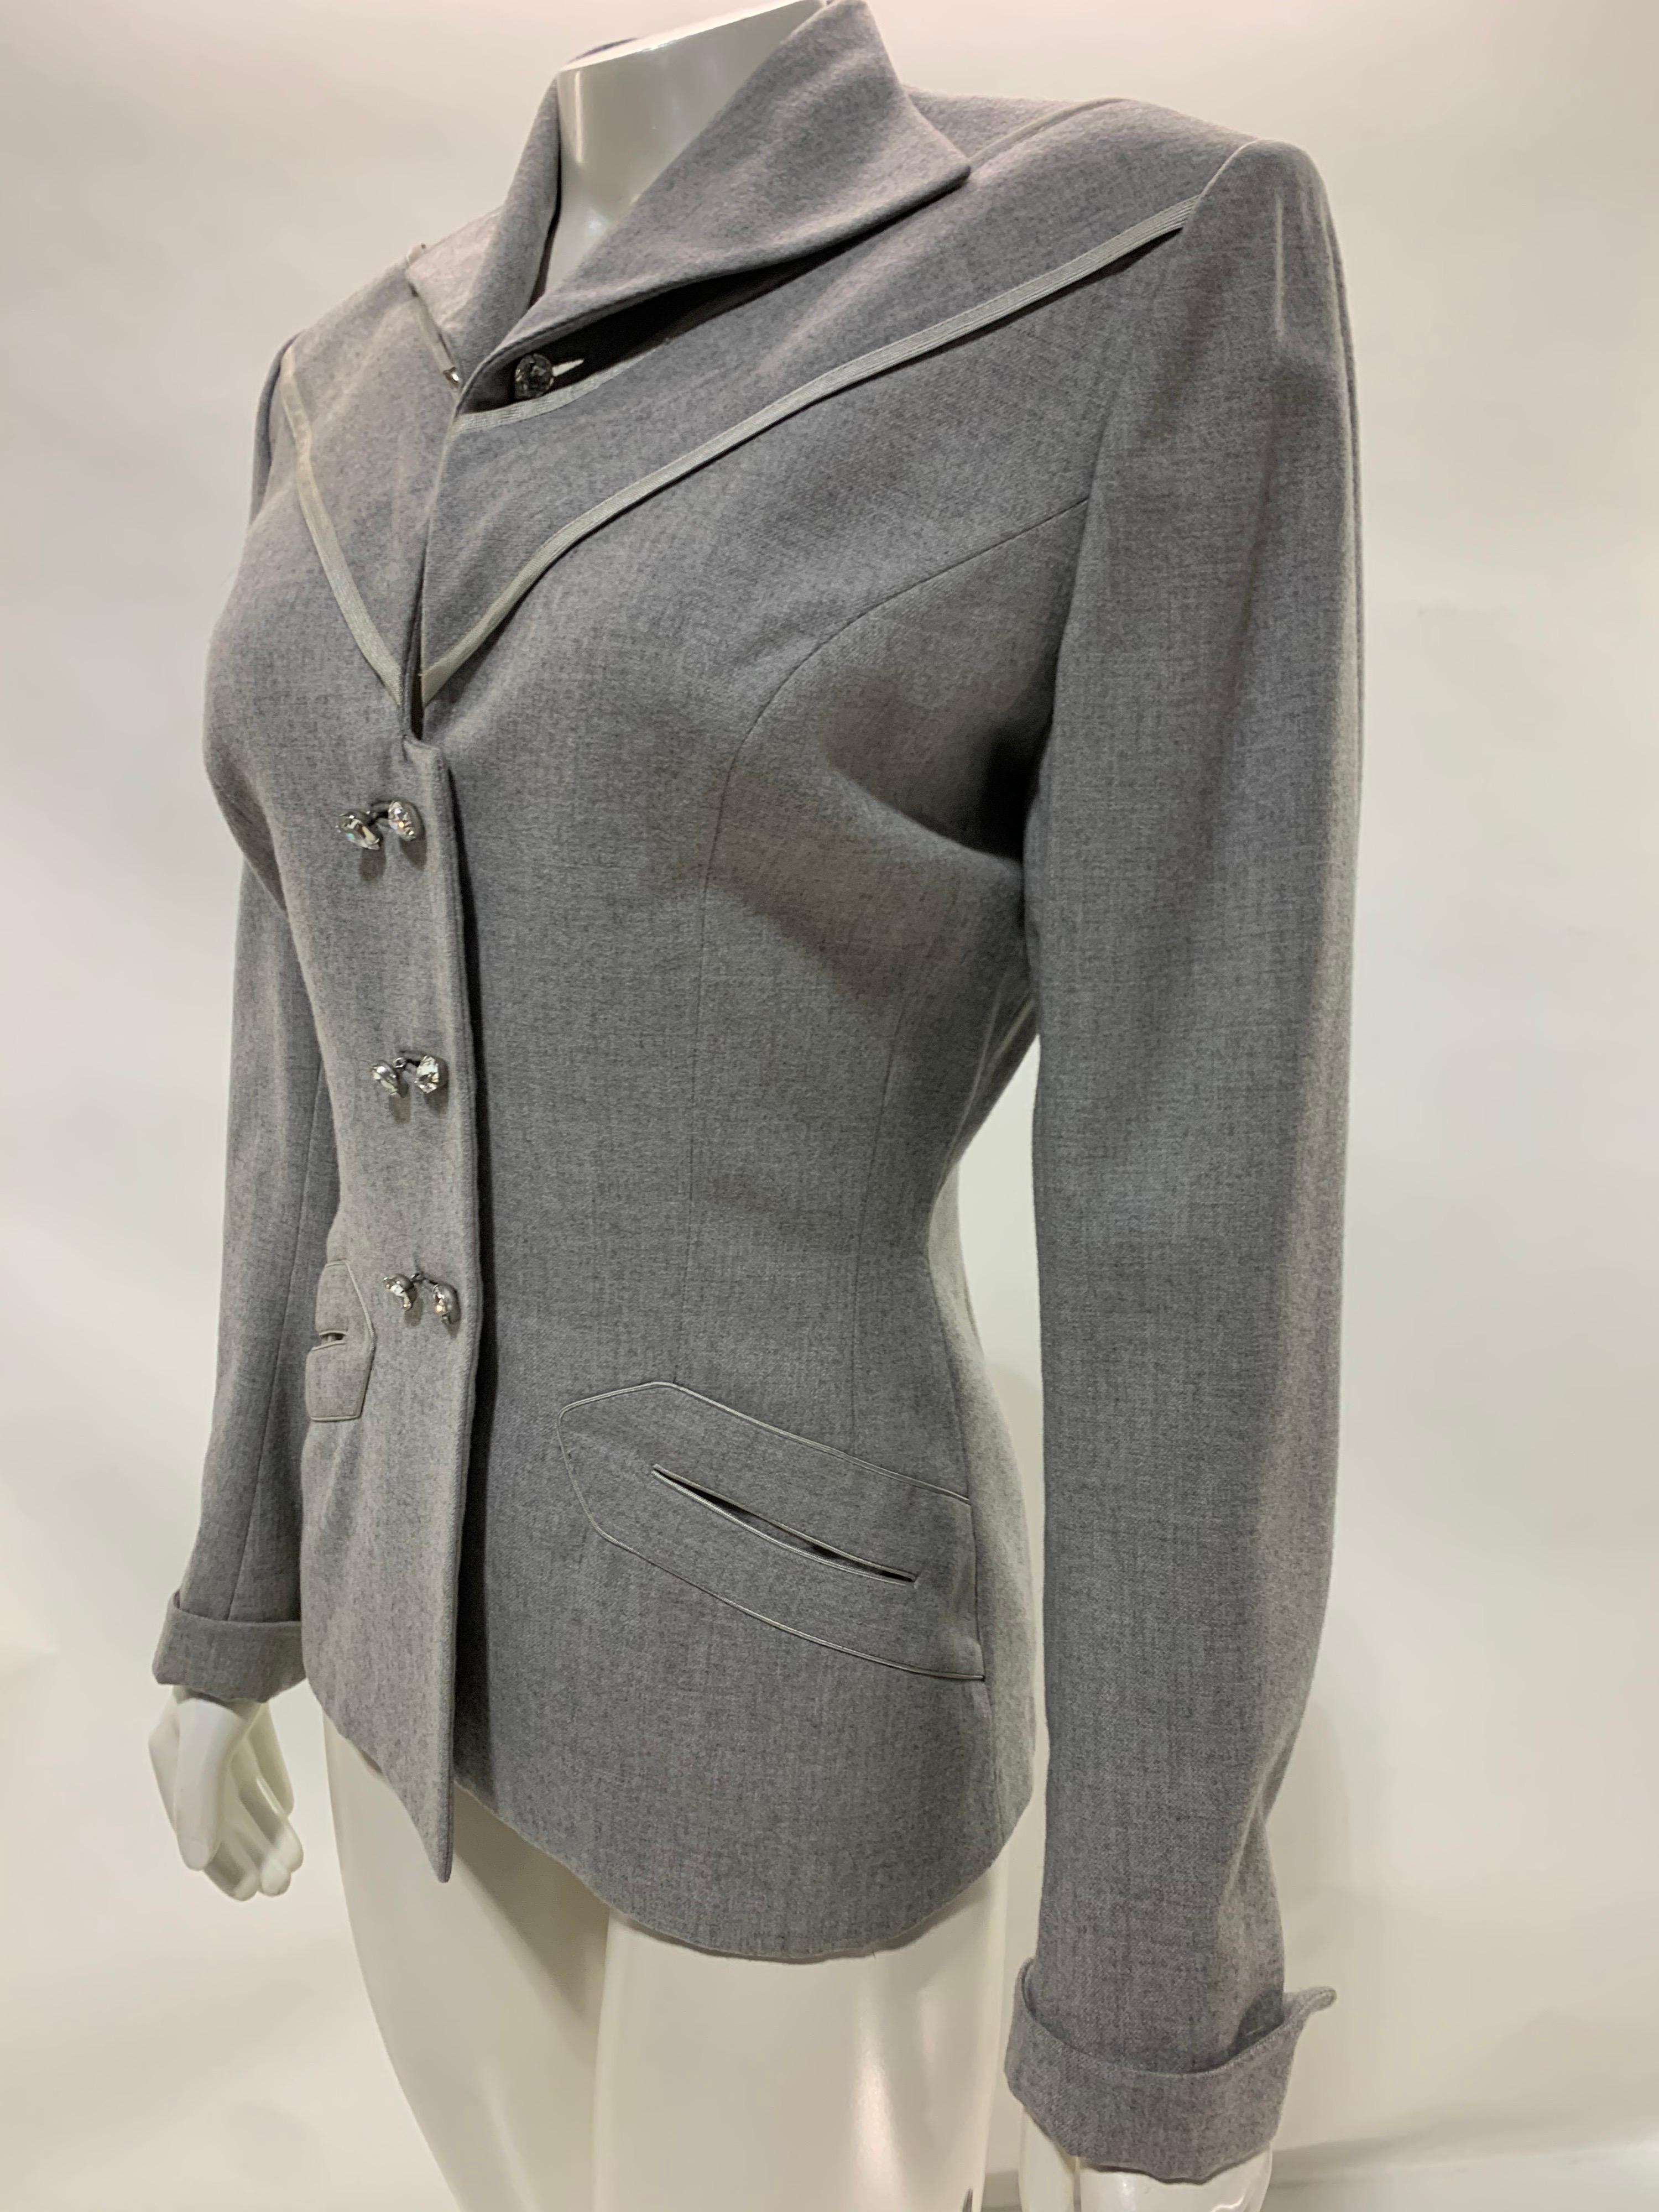 1950s Lilli Ann Gray Heathered Wool Jacket w/ Jeweled Buttons & Satin Piping For Sale 2